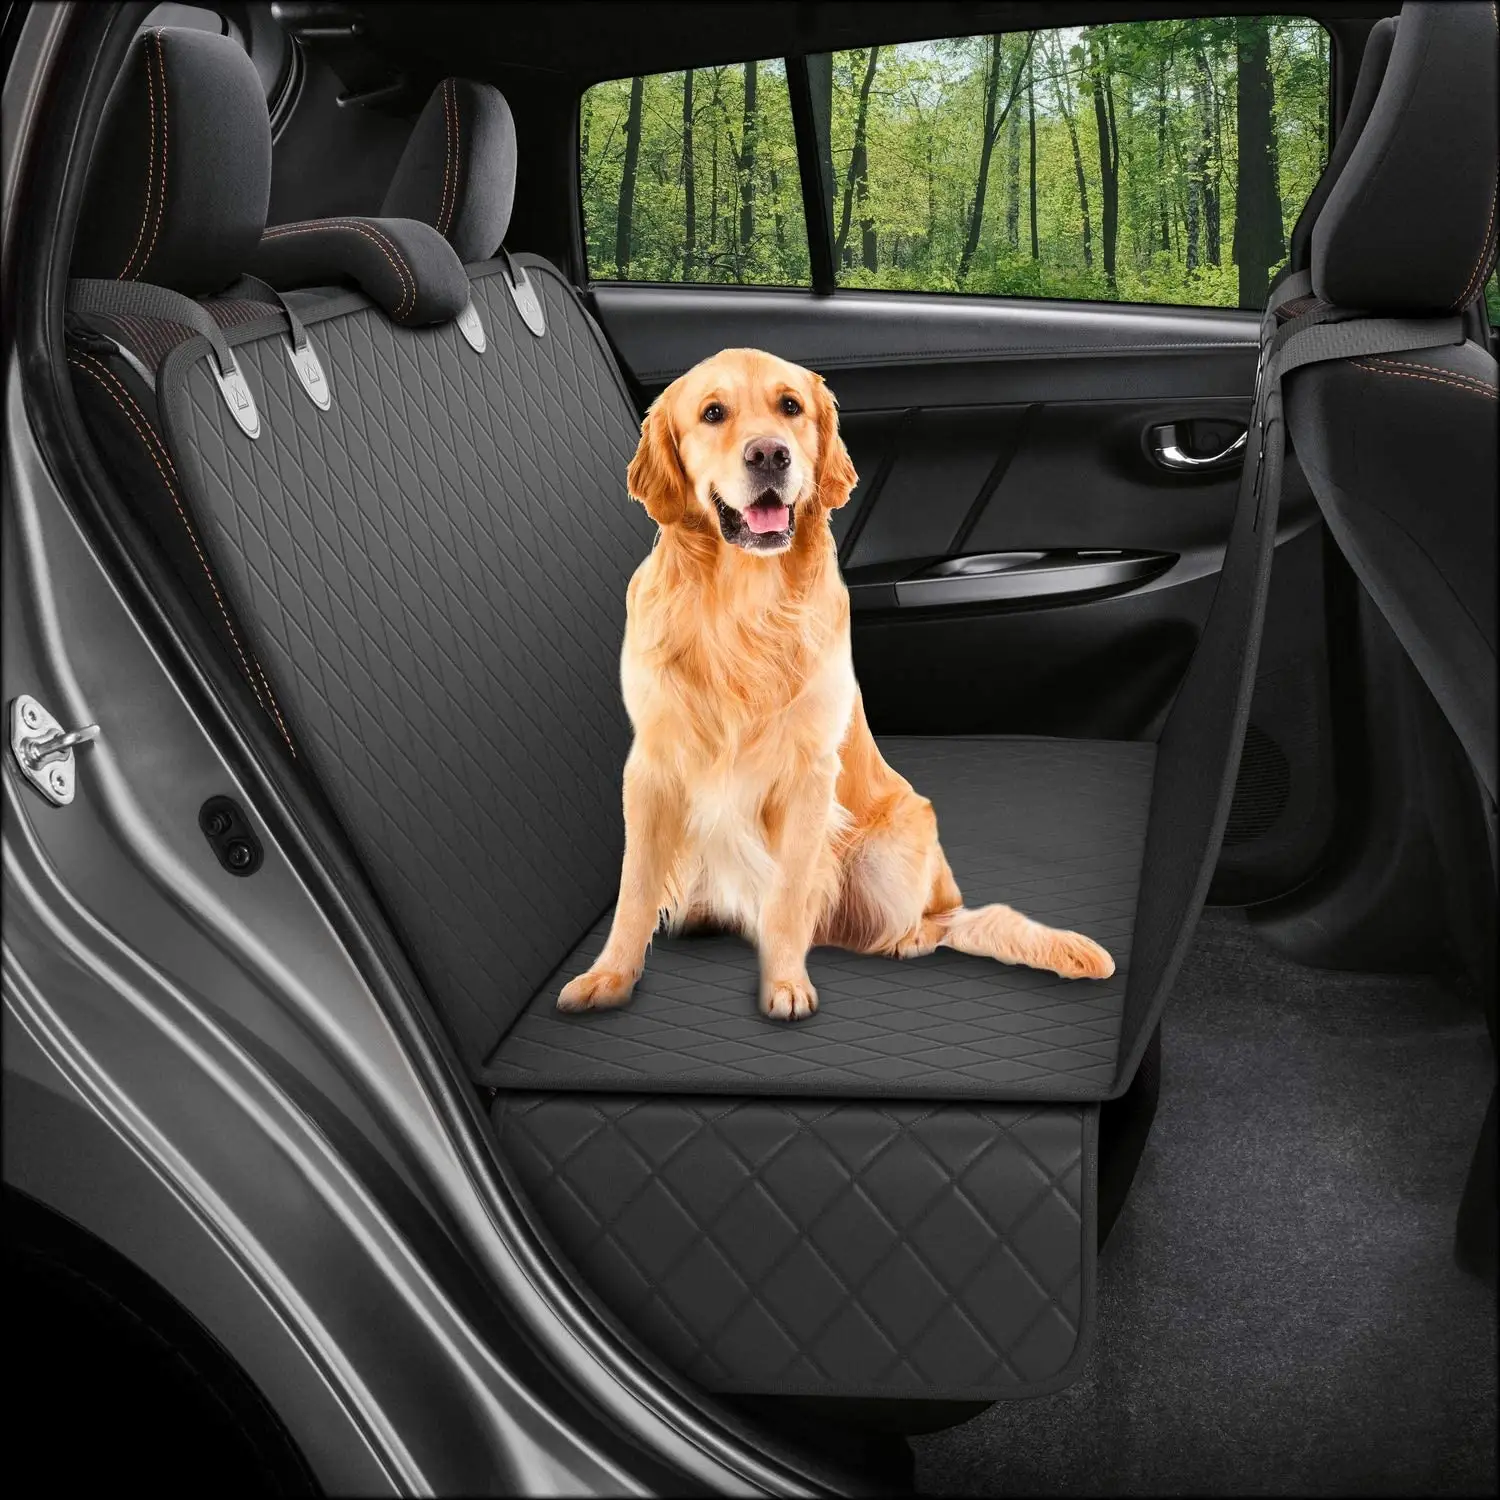 2022 Pets Bench Dog Car Seat Cover for Back Seat Waterproof Dog Seat Covers for Cars Protector for Pet Fur Mud